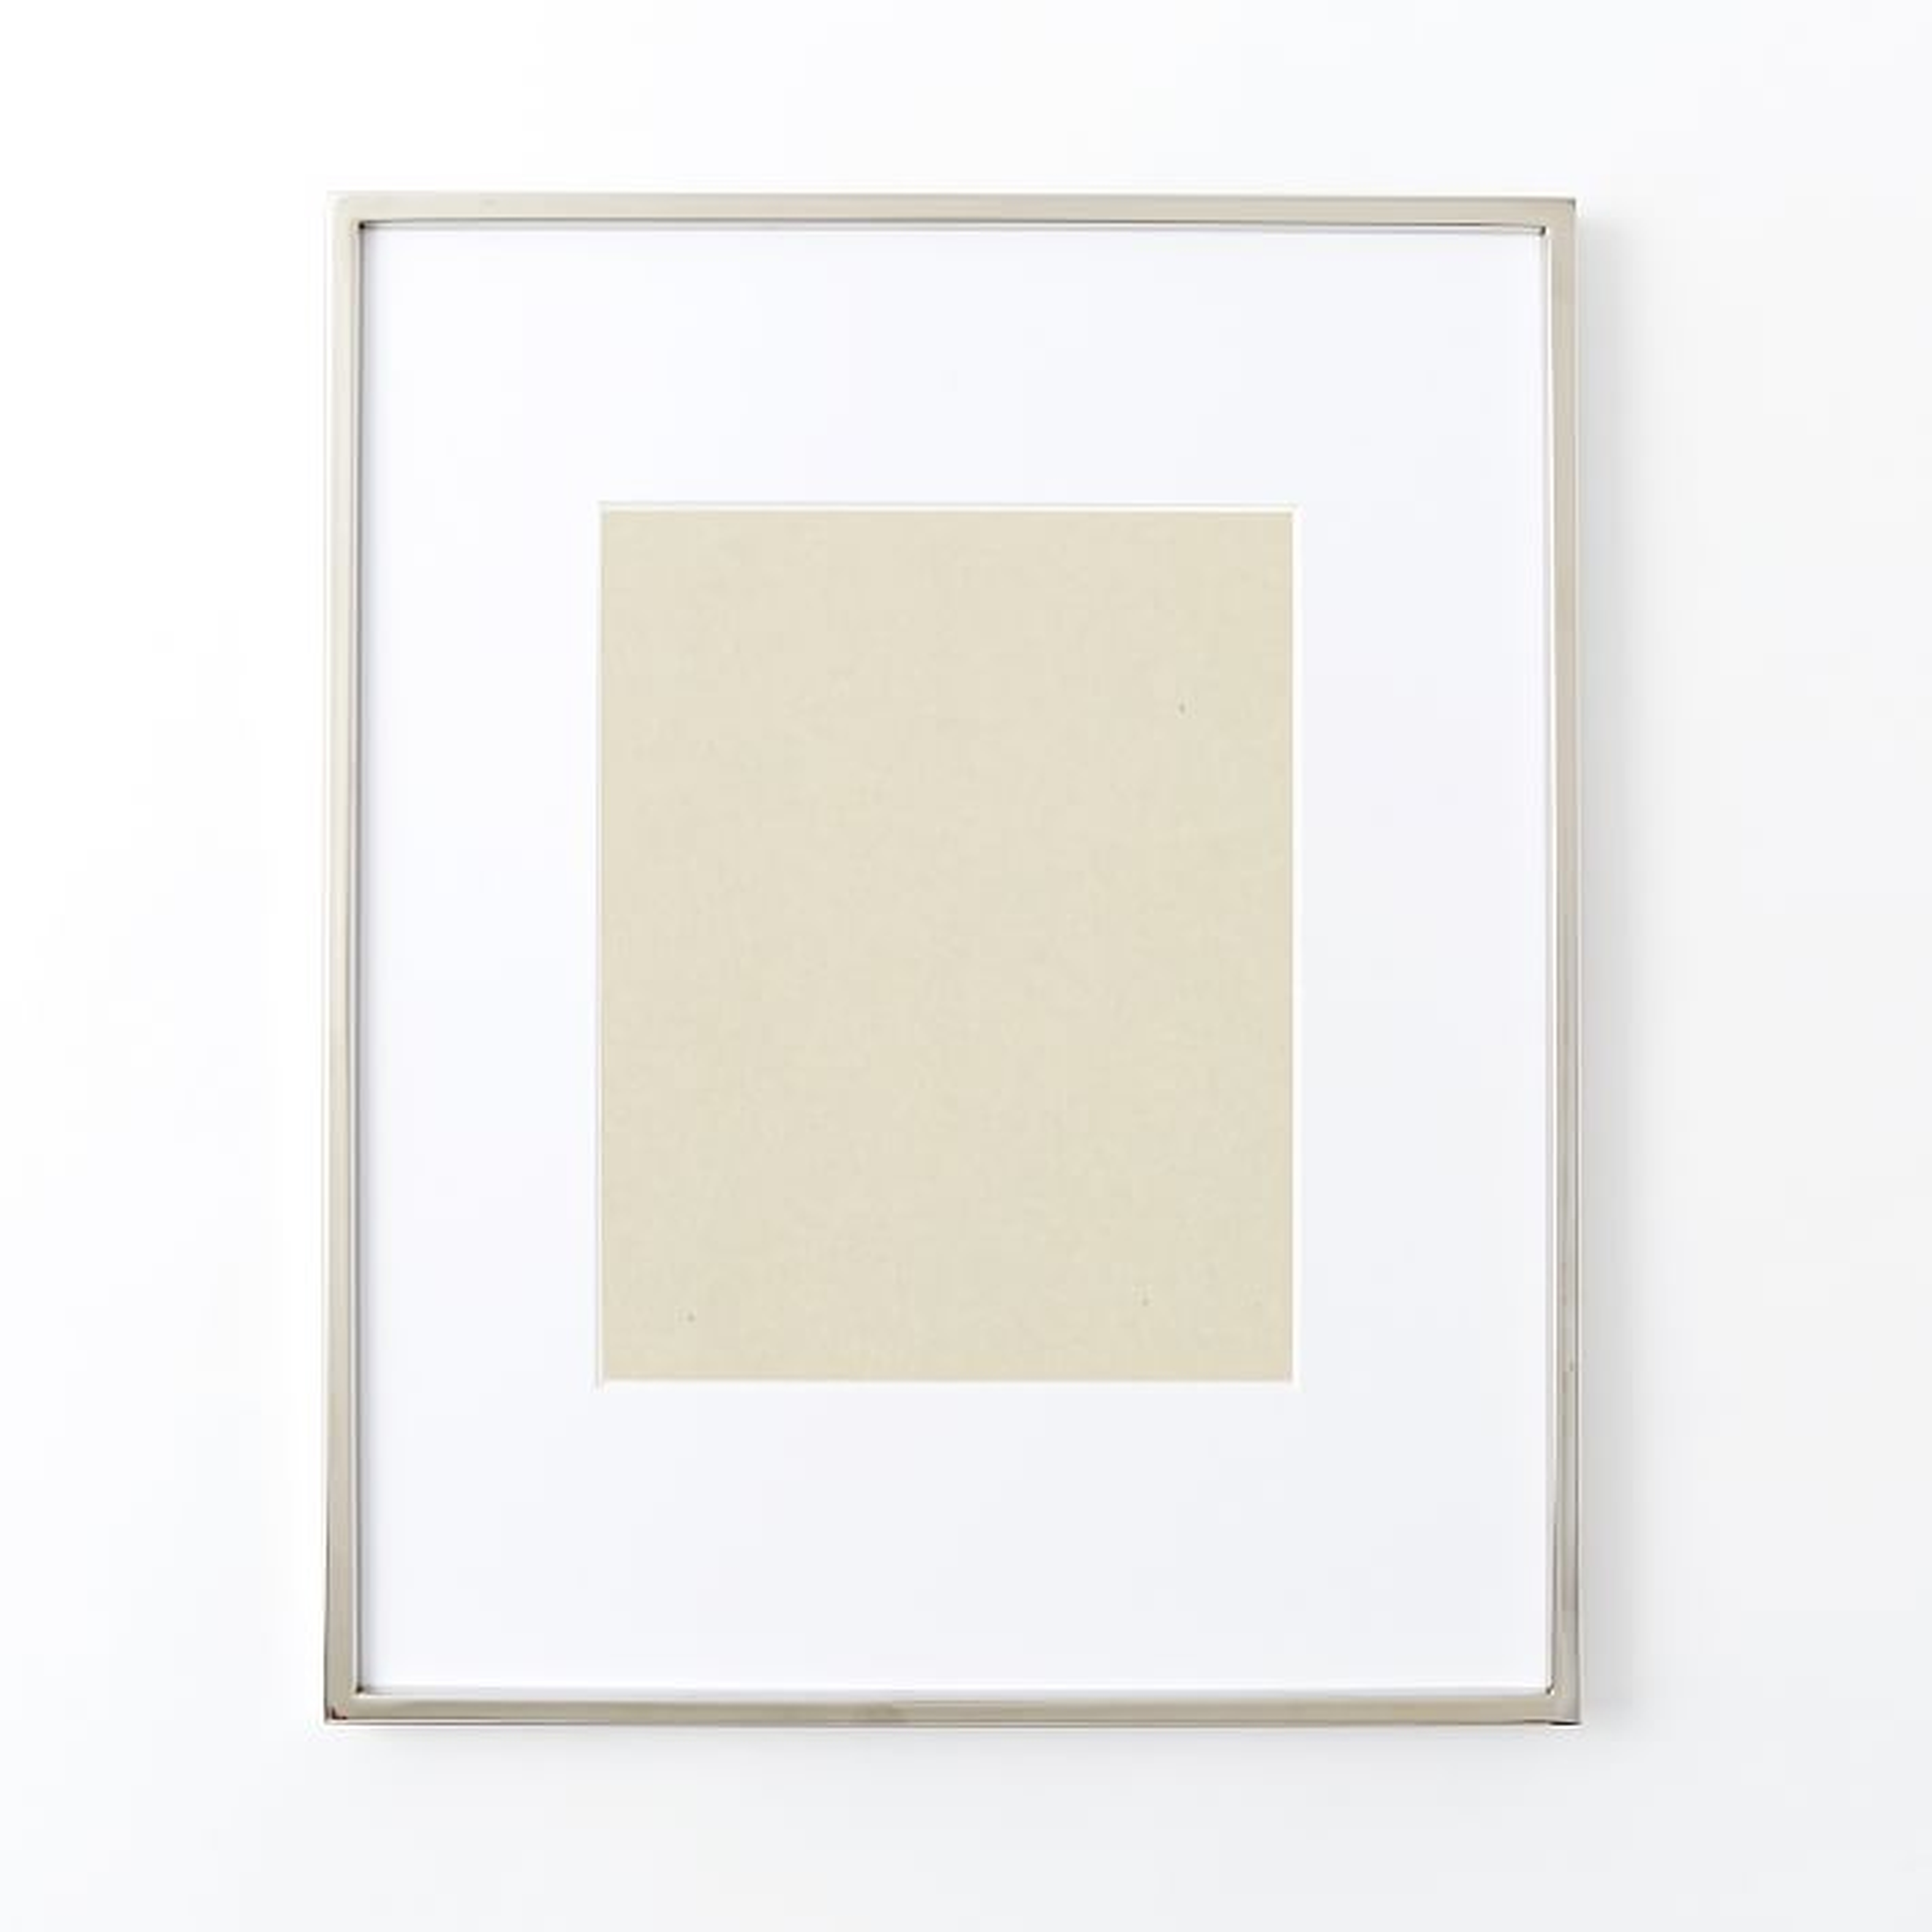 Gallery Frame, Polished Nickel, 8" x 10" (12.75" x 15.75" without mat) - West Elm